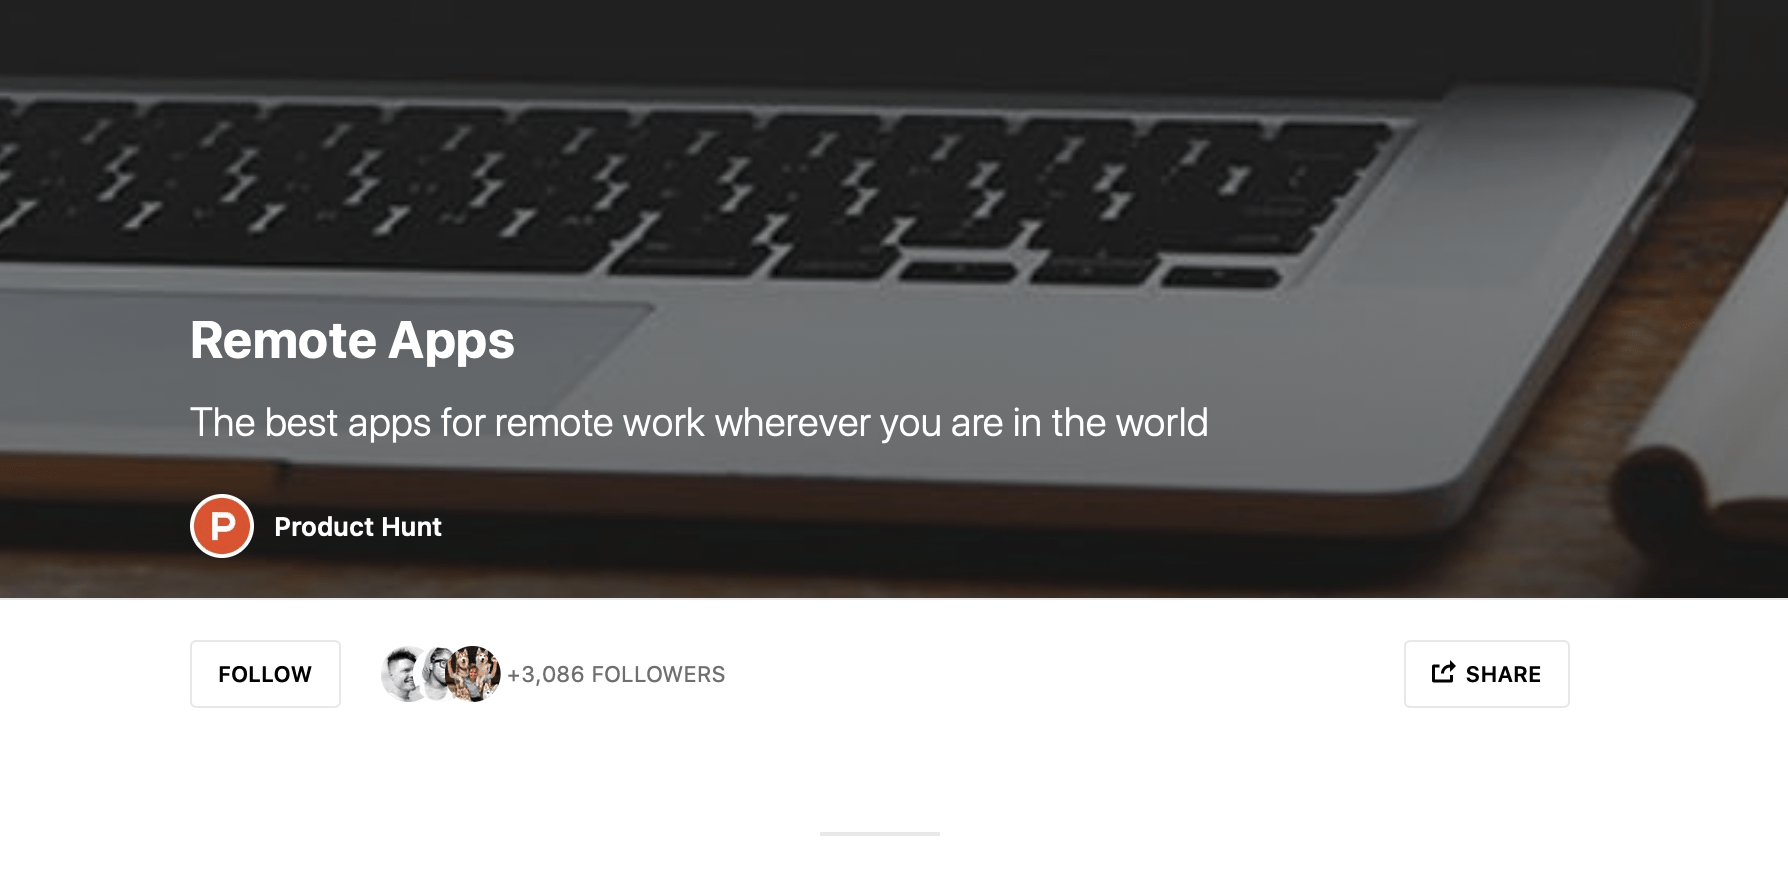 Remote Work Apps | Motion Master Templates | Remote Apps | Animation Templates for Apple’s Final Cut & Motion Software